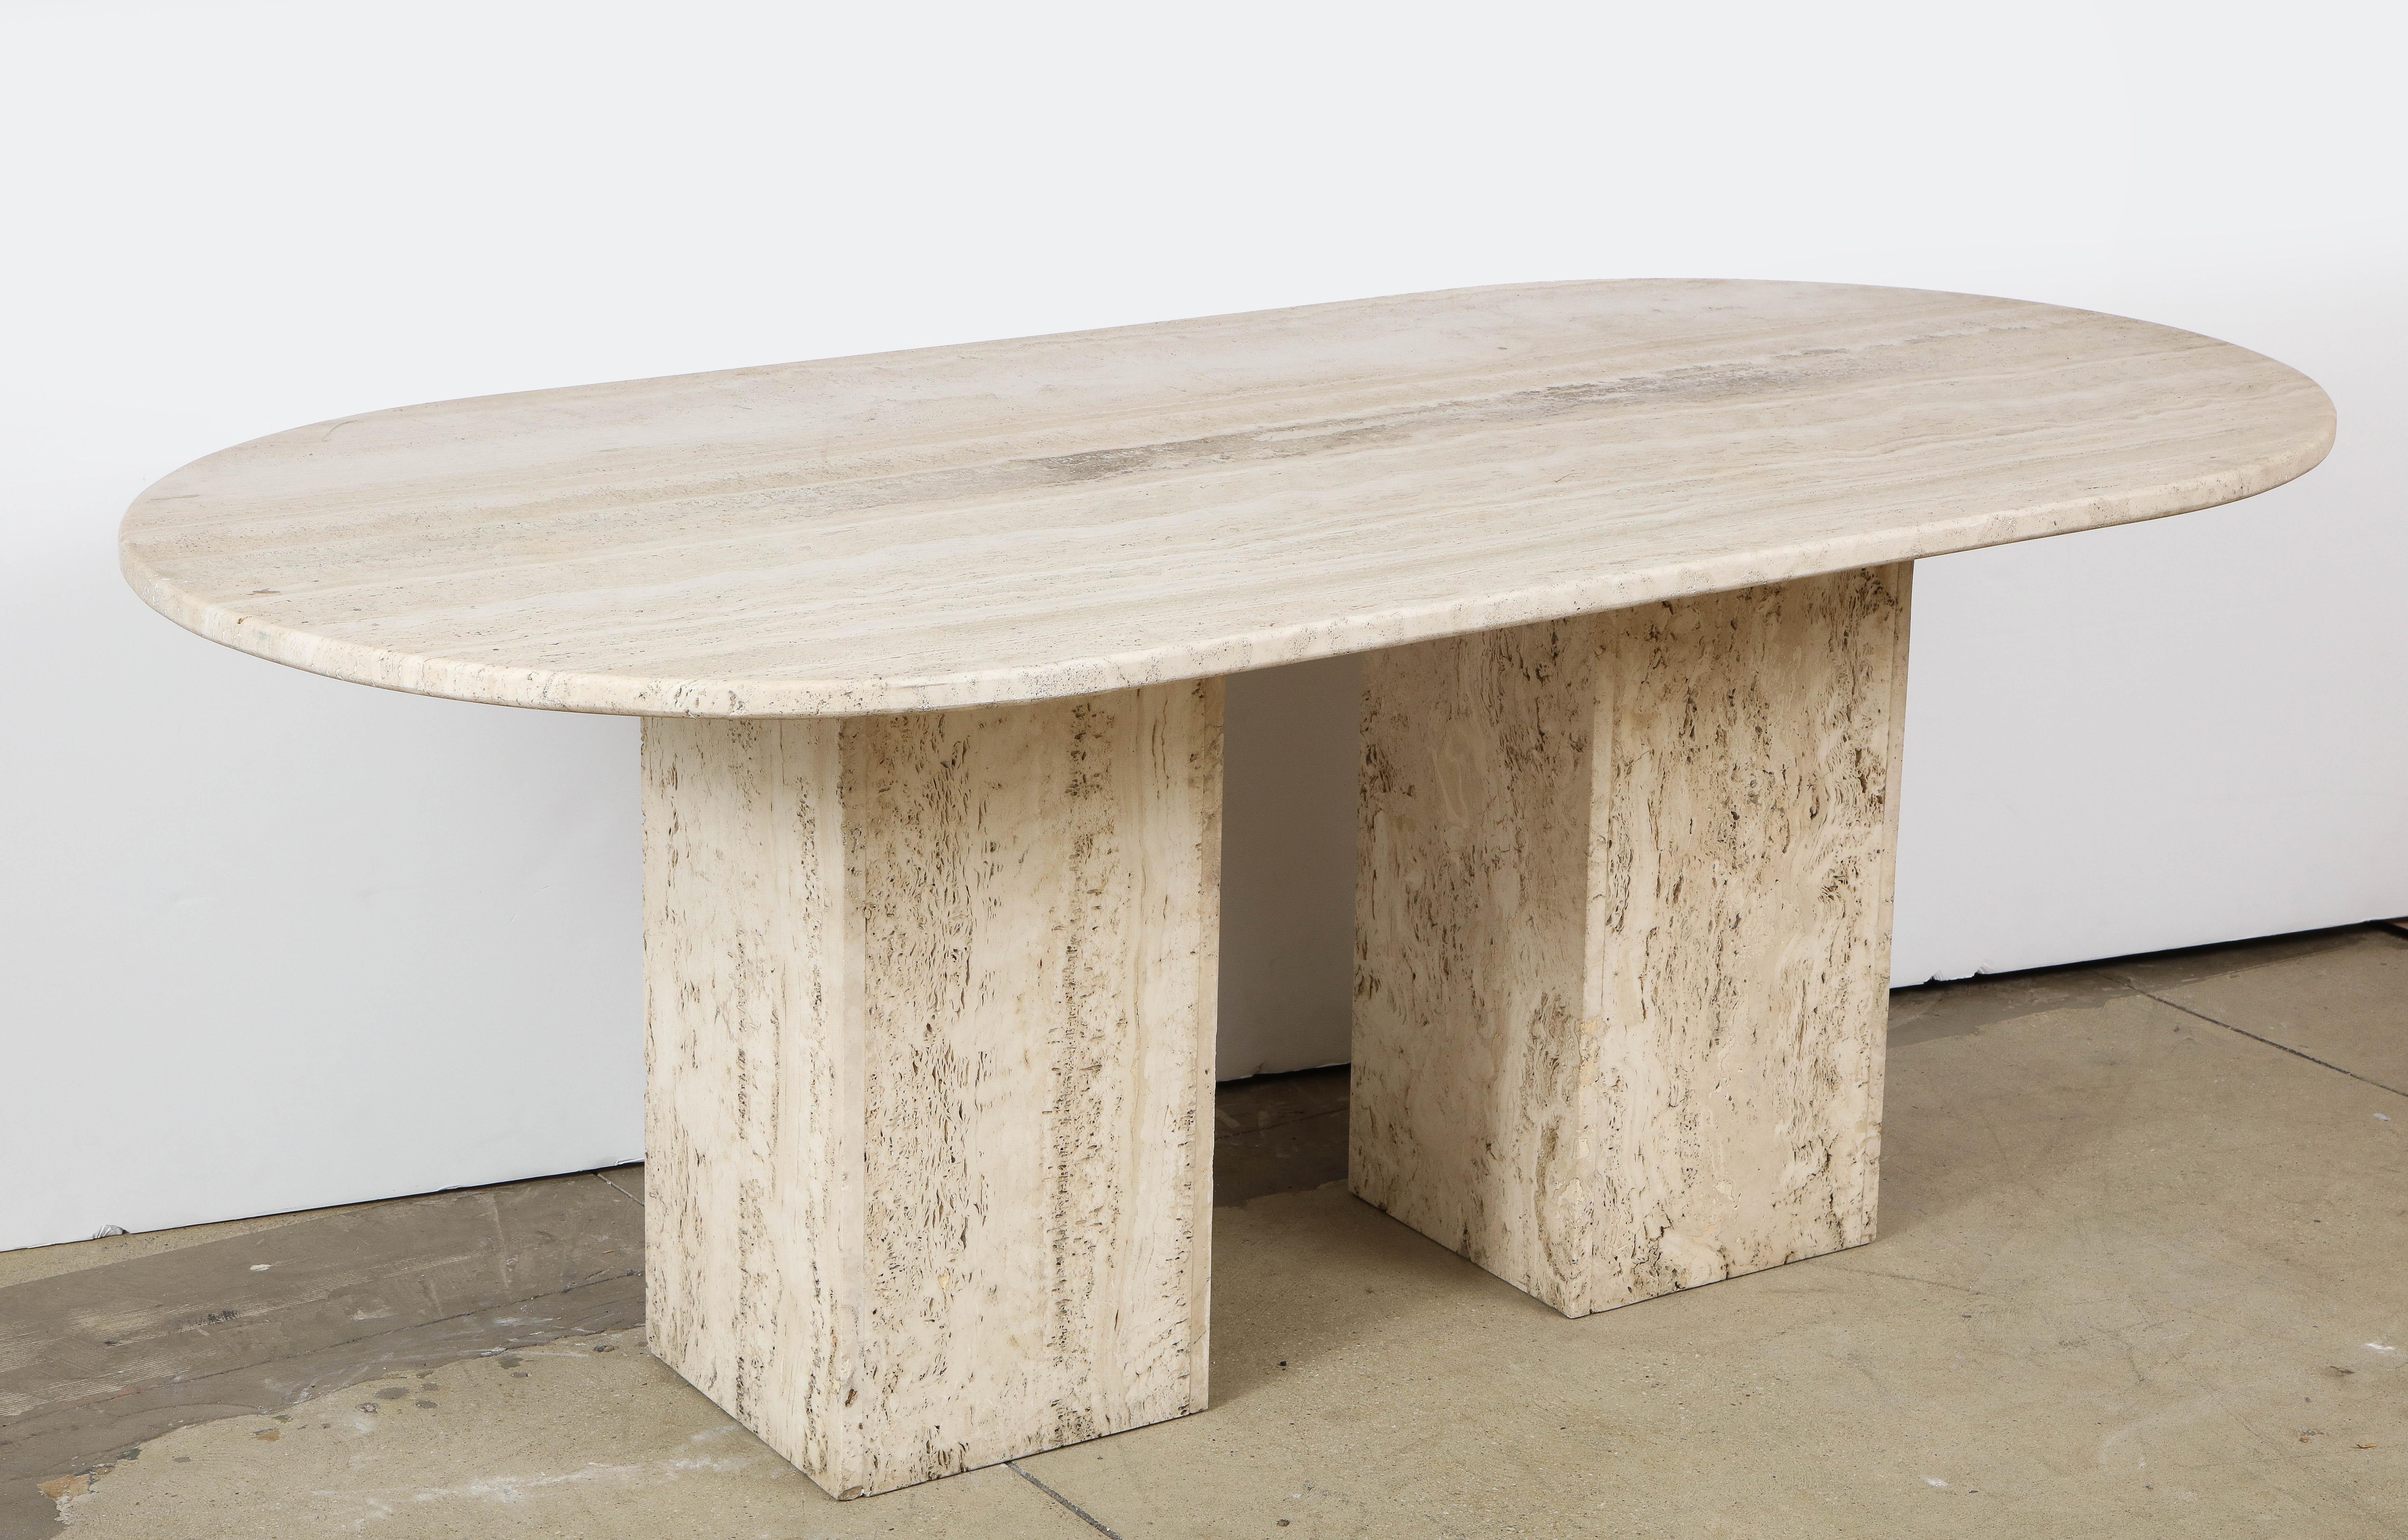 Italian Minimalist Roman travertine dining table, Italy, circa 1970s
Racetrack oval, in three pieces.
Measure: H 30.75, D 39.33, L 79 in.

     